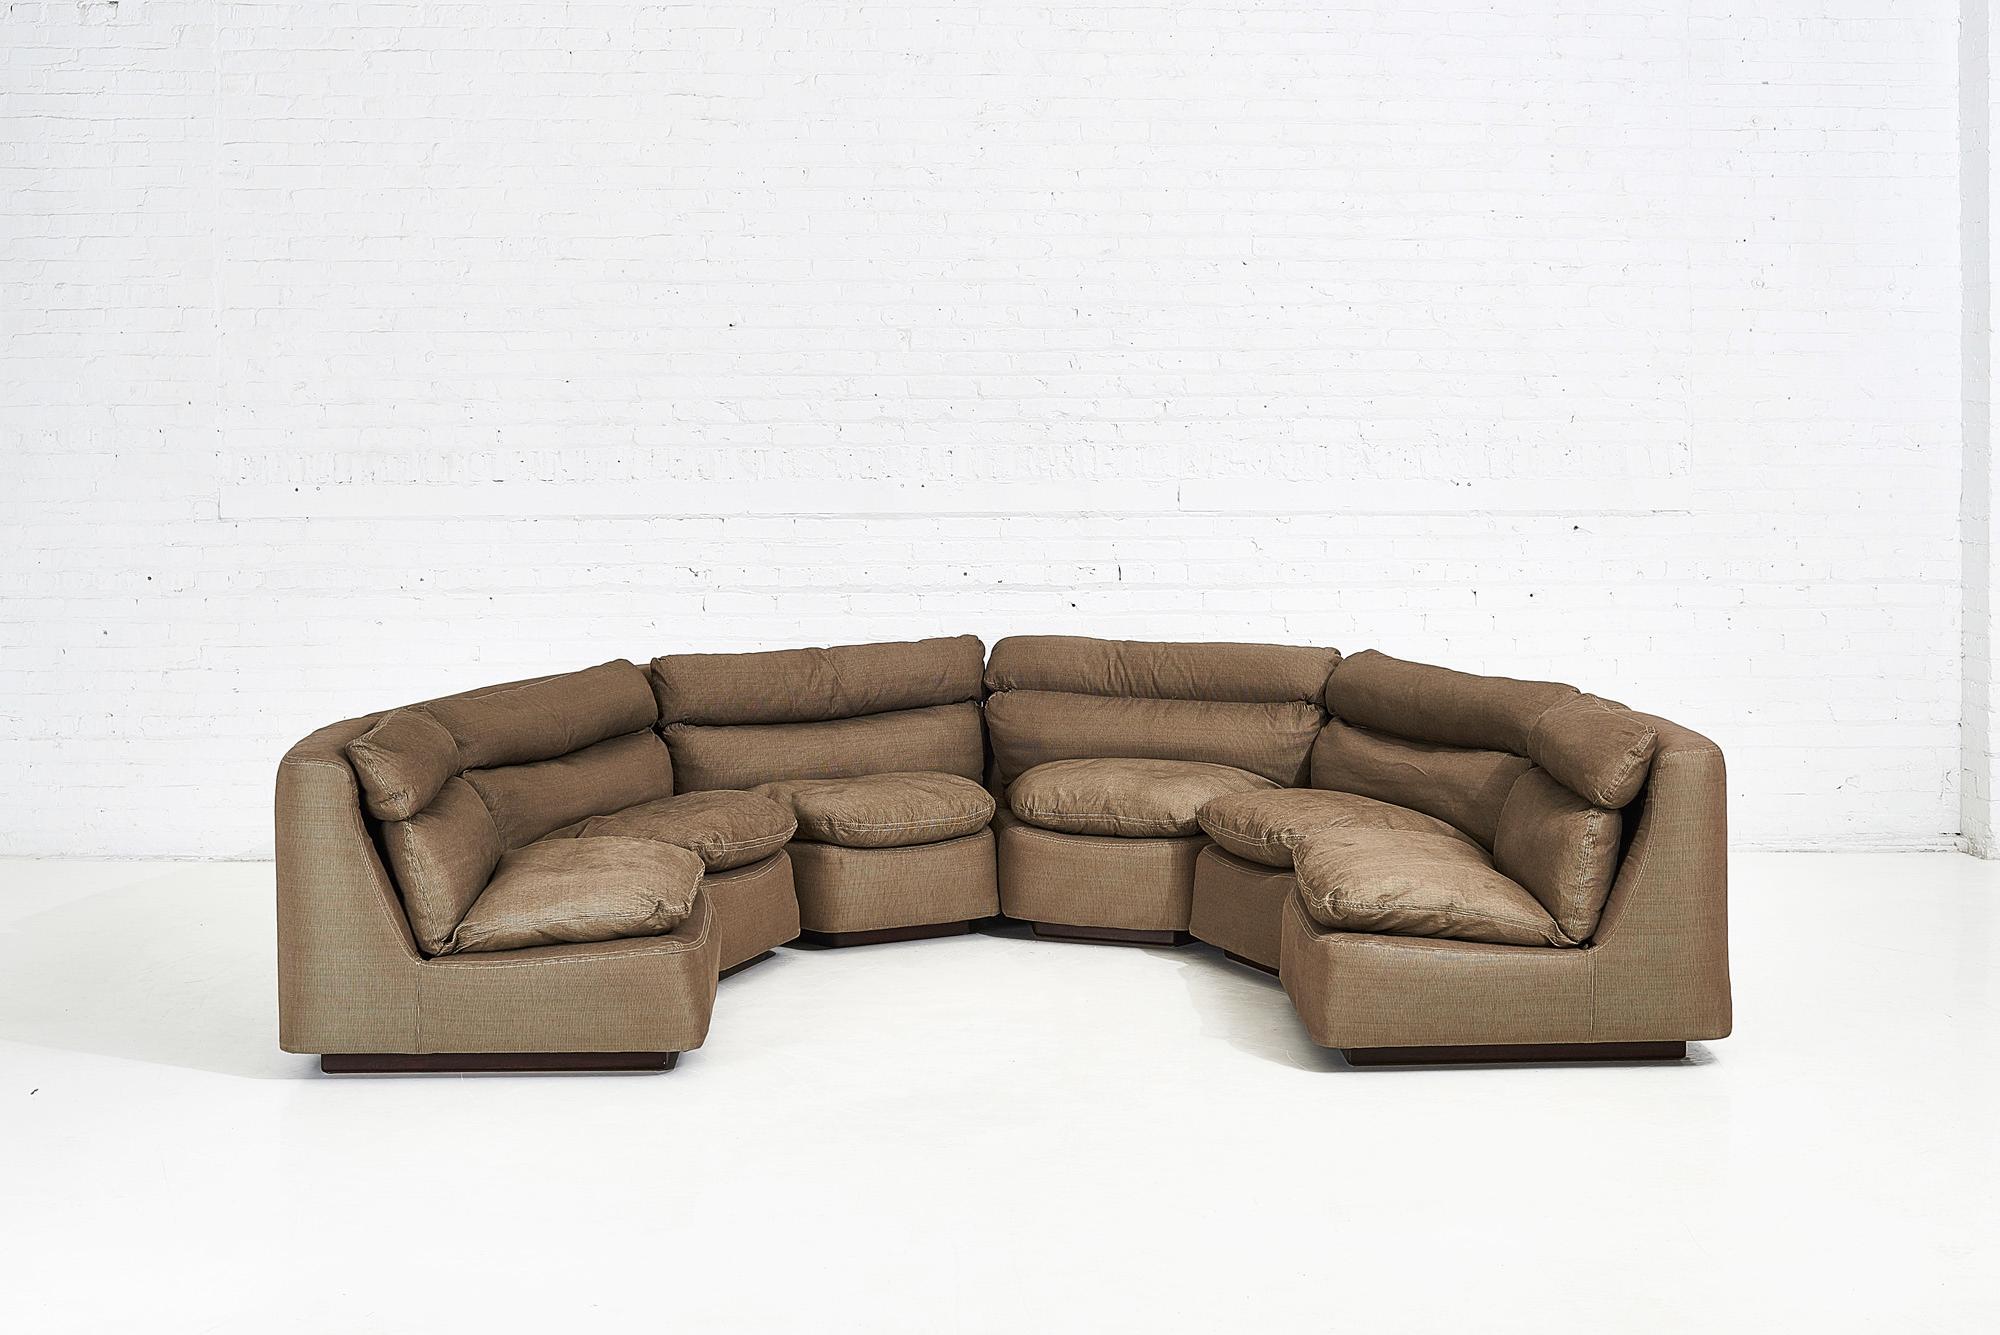 Post-Modern Holly Hunt Curved Modular Sectional, 1990 For Sale